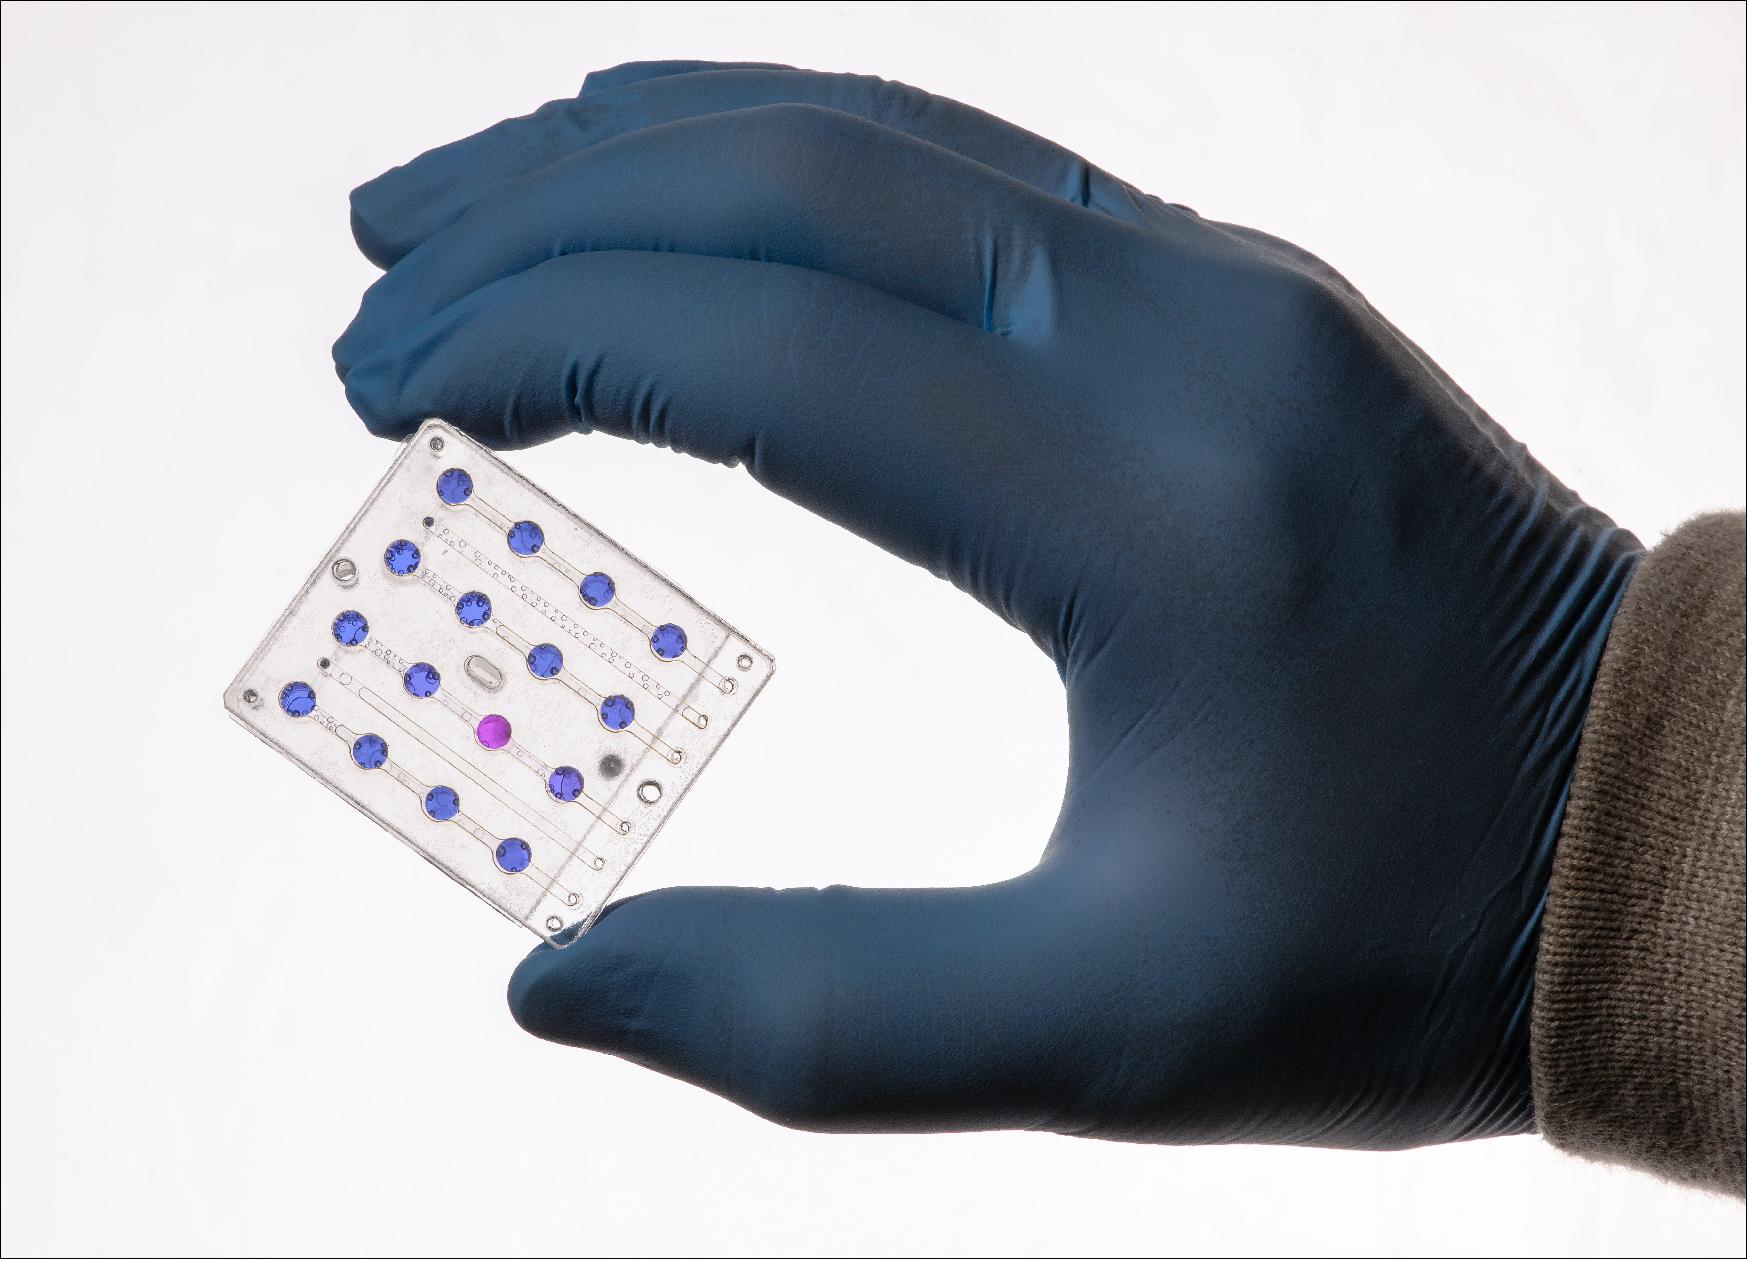 Figure 9: BioSentinel will perform the first long-duration biology experiment in deep space. Its six-month science investigation will study the effects of deep space radiation on a living organism, yeast. Pictured is one of BioSentinel’s microfluidic cards that will be used to measure the impact of radiation on yeast cells housed in tiny compartments. The microfluidic system includes a dye that provides a readout of yeast cell activity with a color change from blue to pink (image credit: NASA, Dominic Hart)